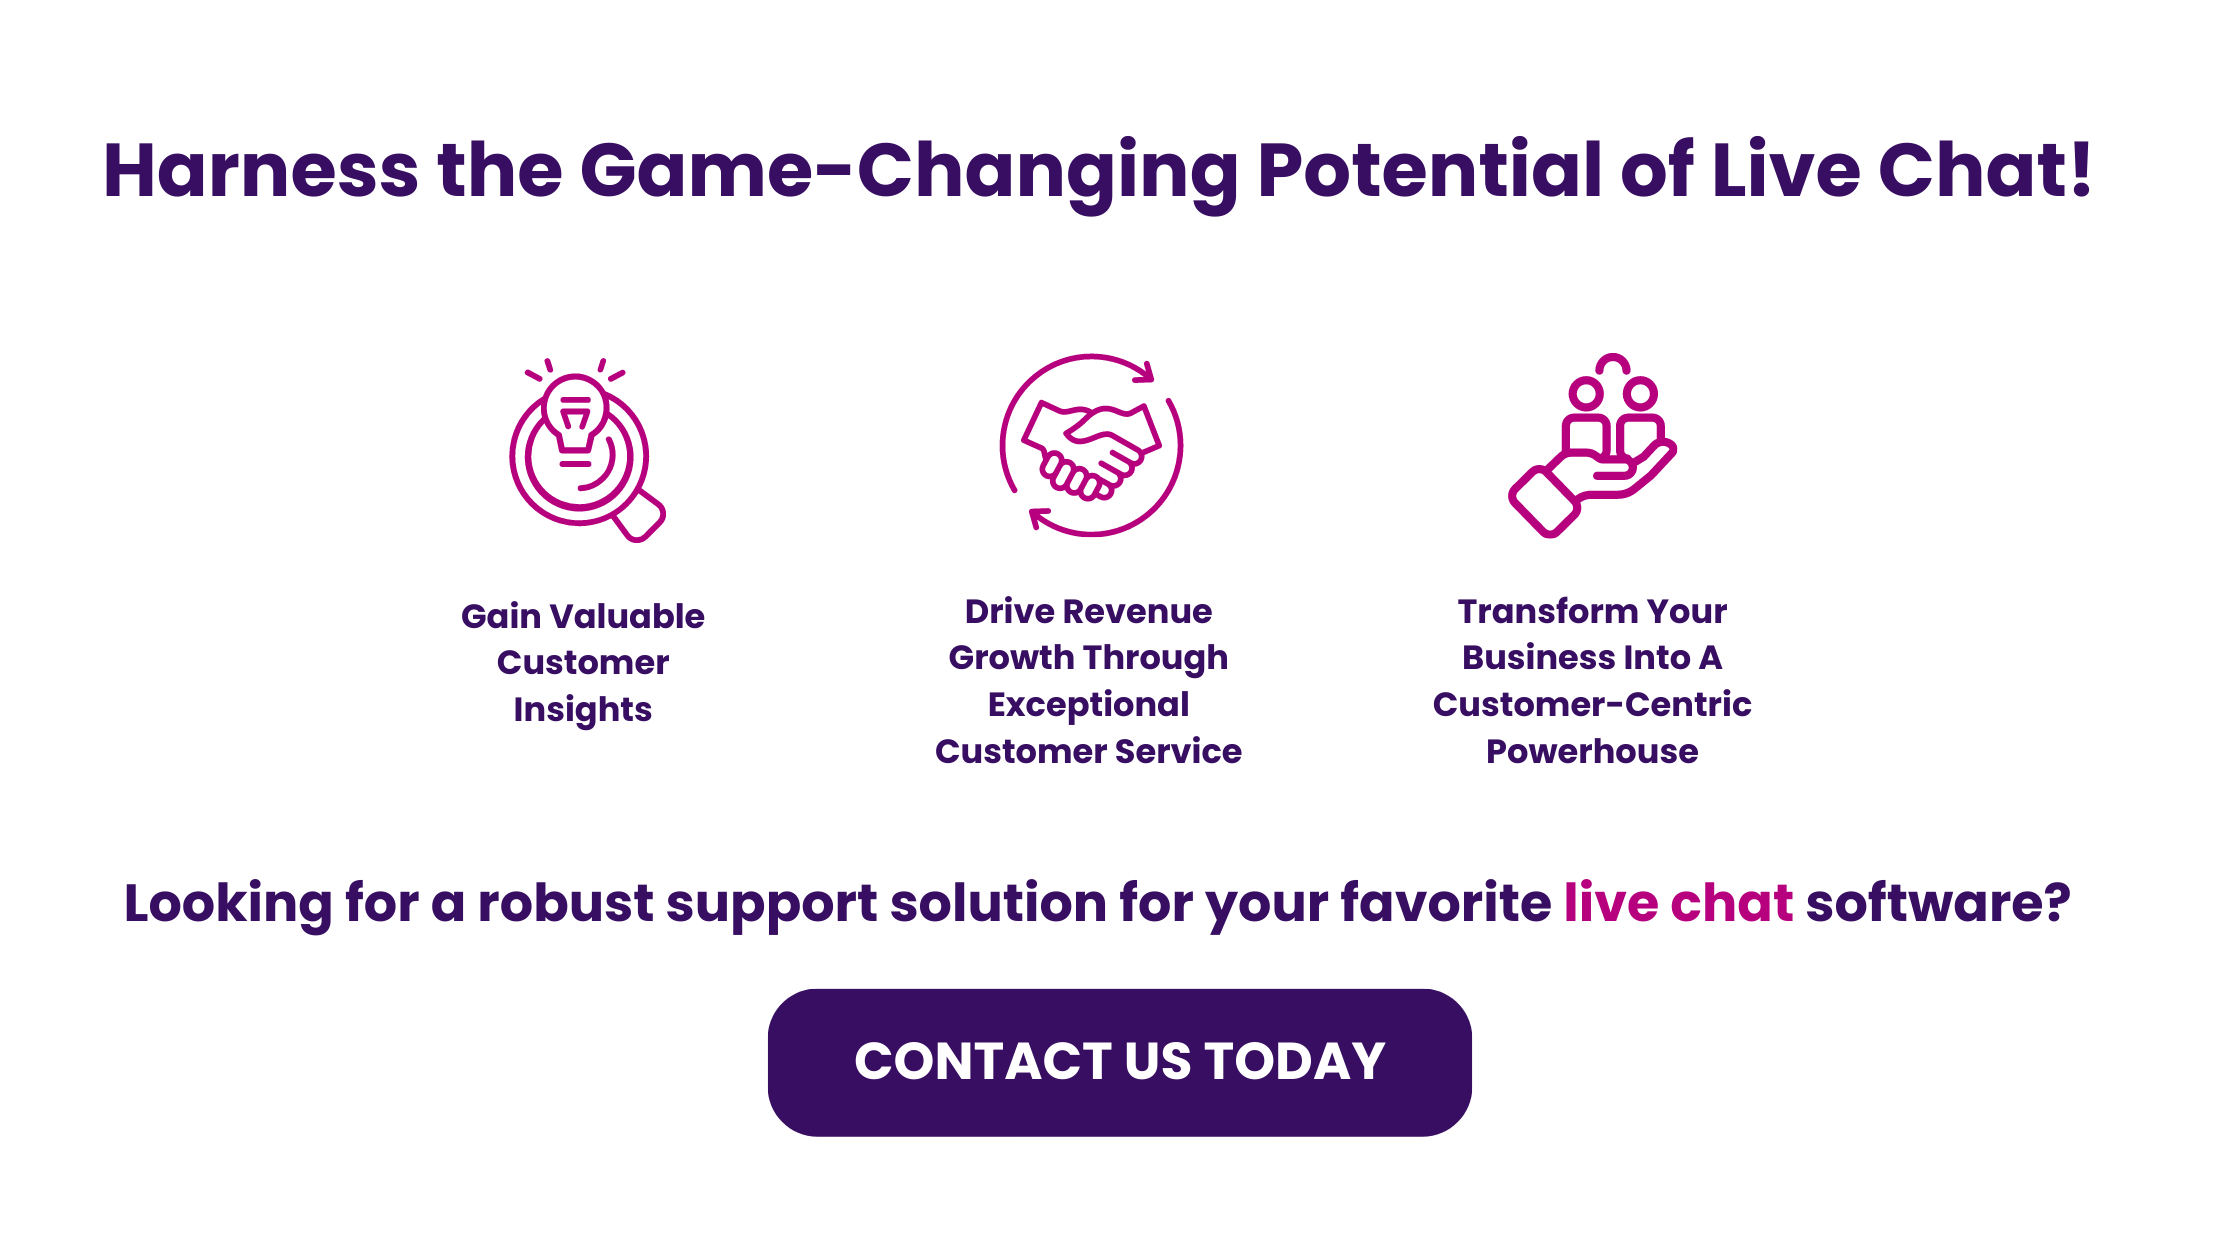 Harness the Game-Changing Potential of Live Chat!